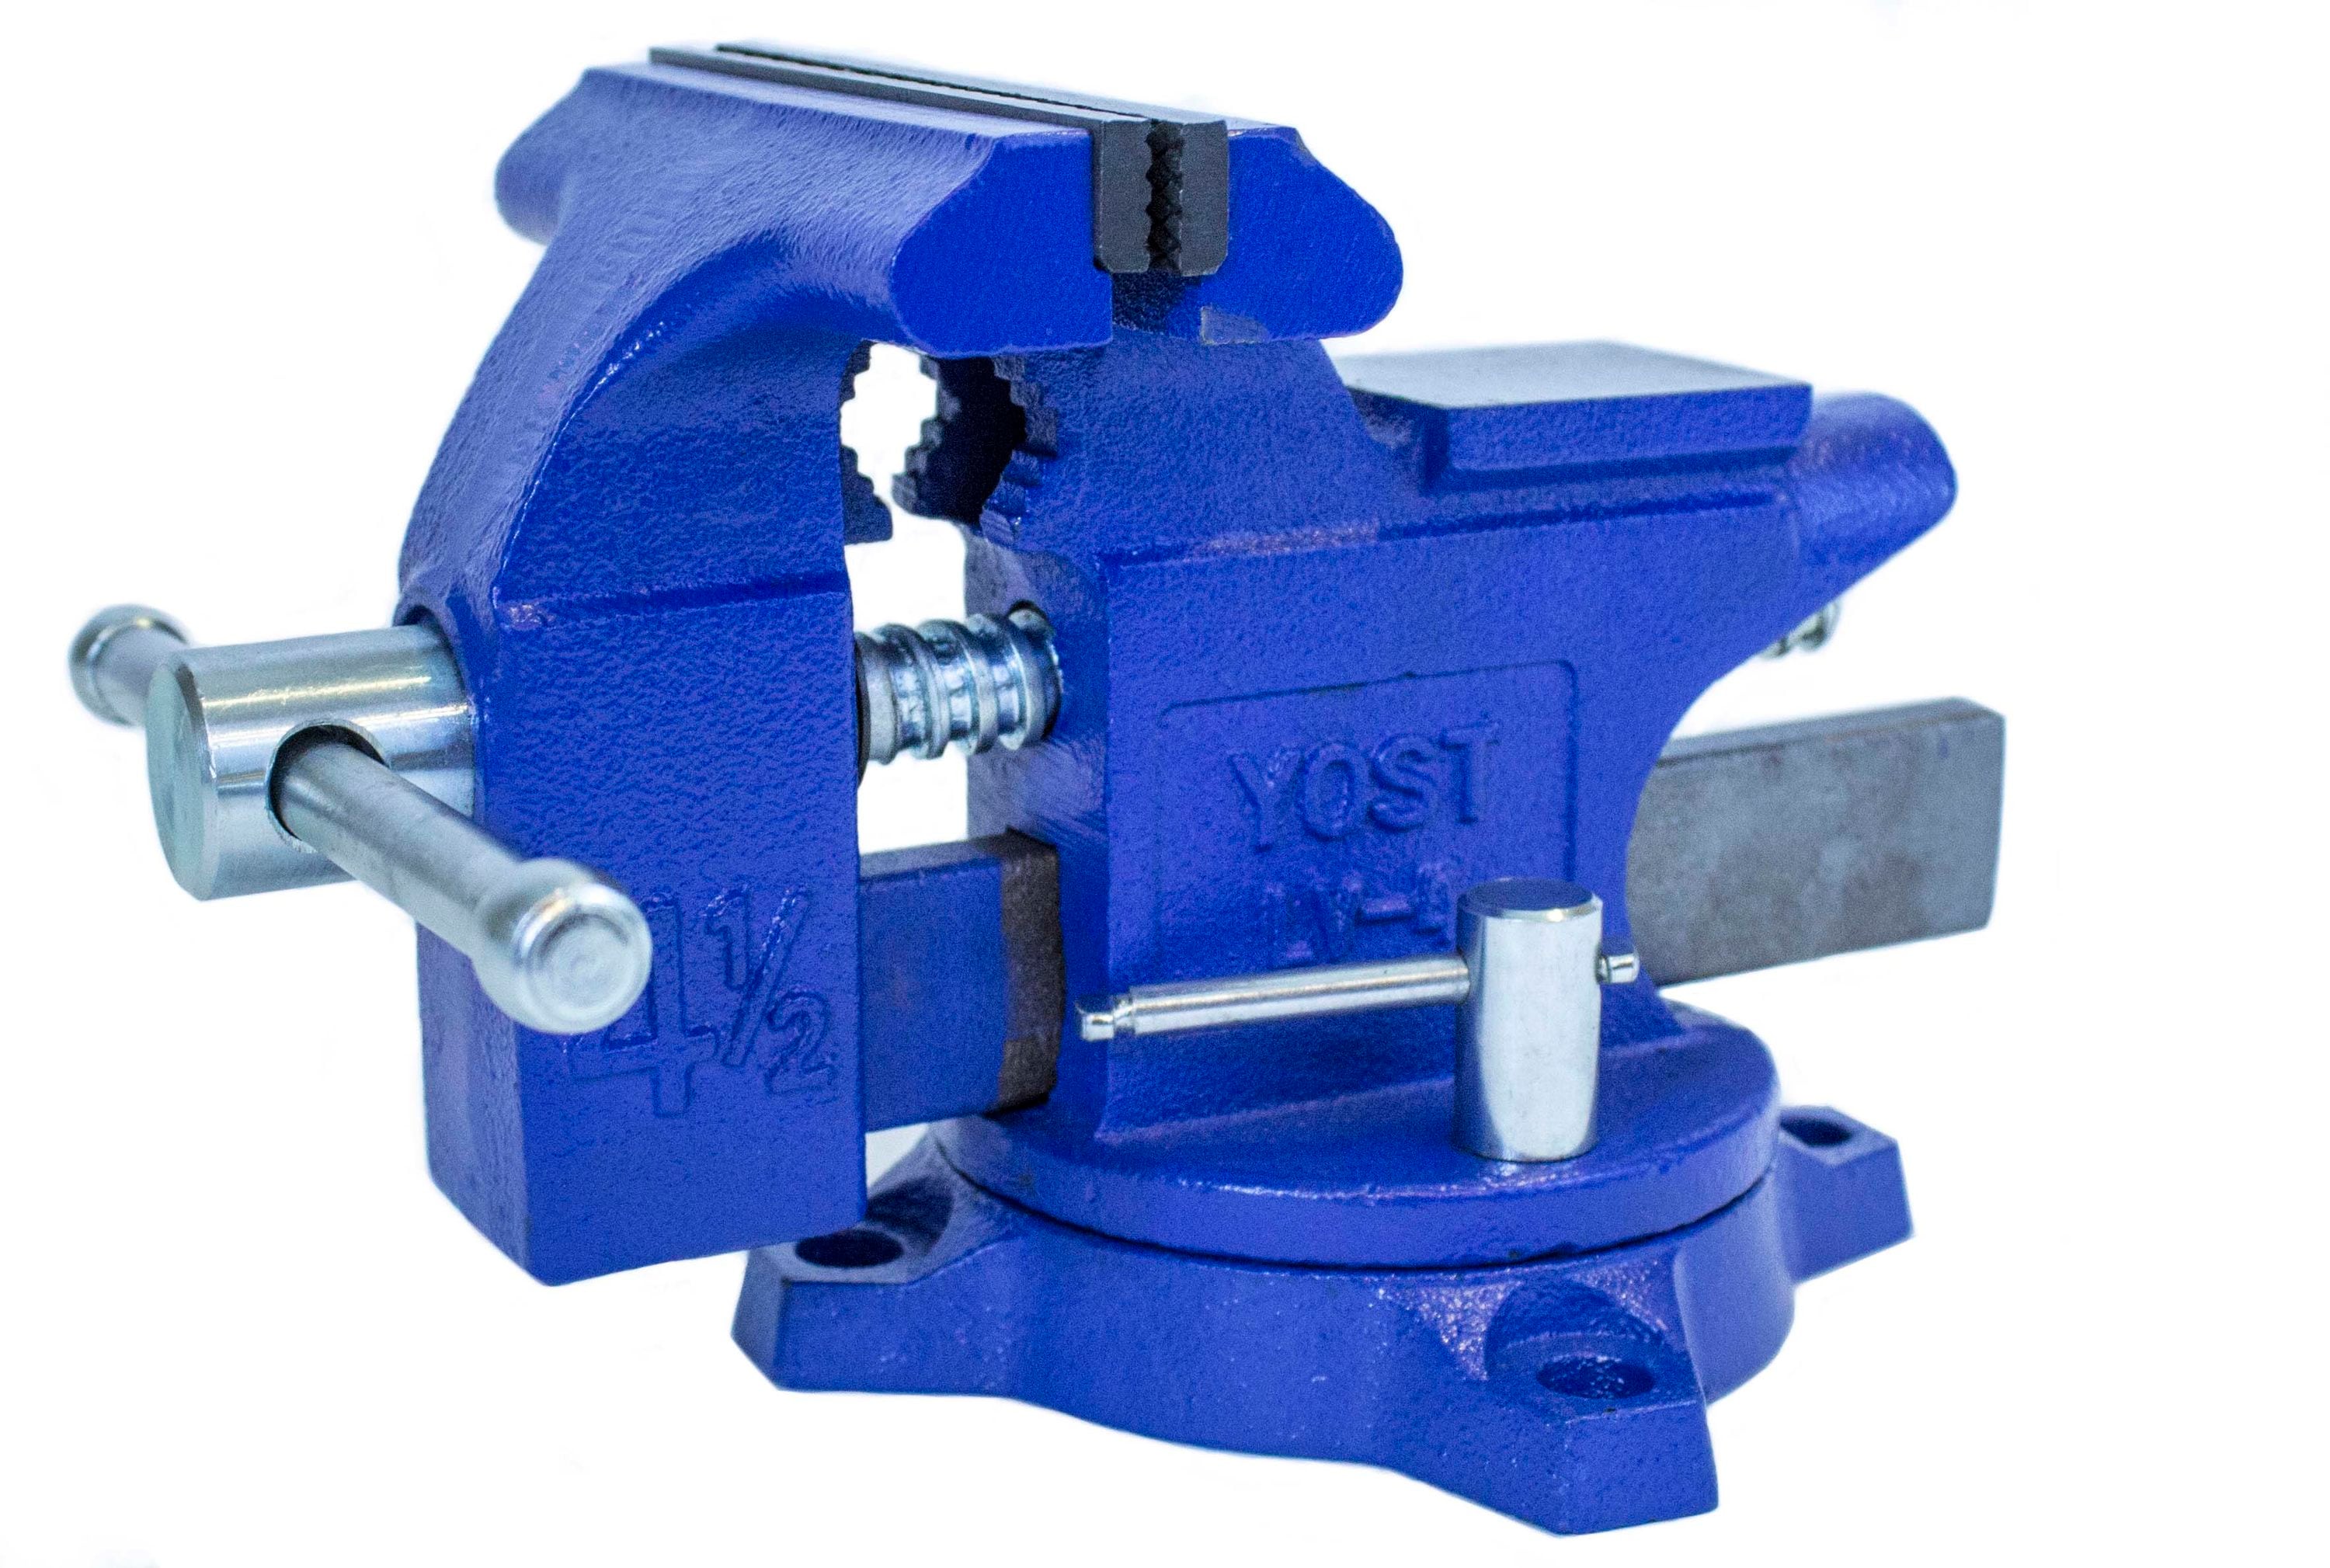 Model 4-in Homeowner's Vise, 4-in Jaw Width, 3-in Maximum Jaw Opening, Blue Finish | - Yost LV-4